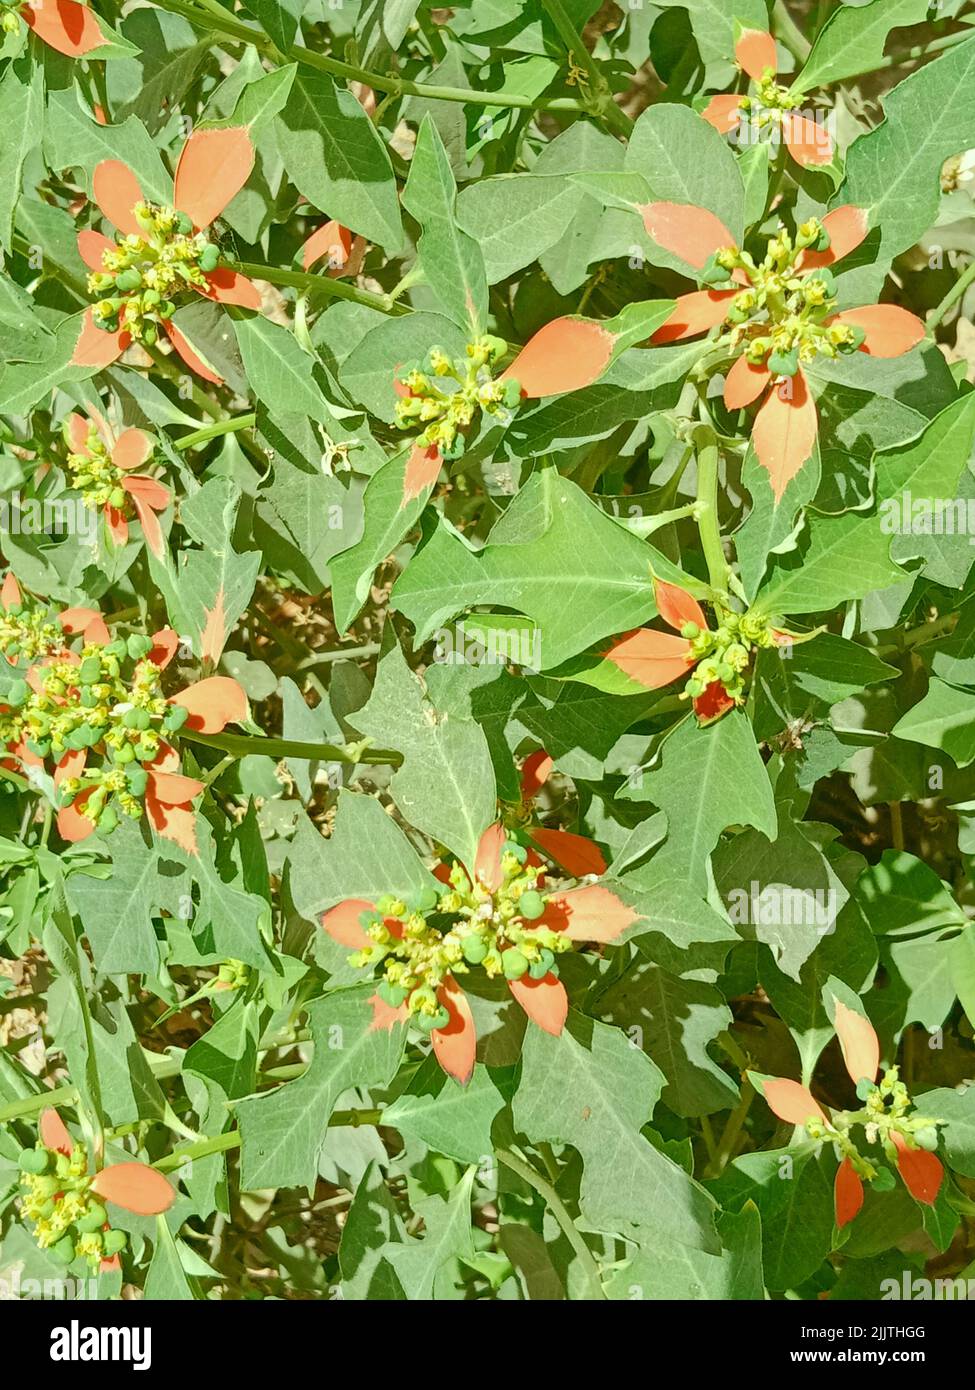 A shrub of dwarf poinsettia plant with tiny green blossoms Stock Photo